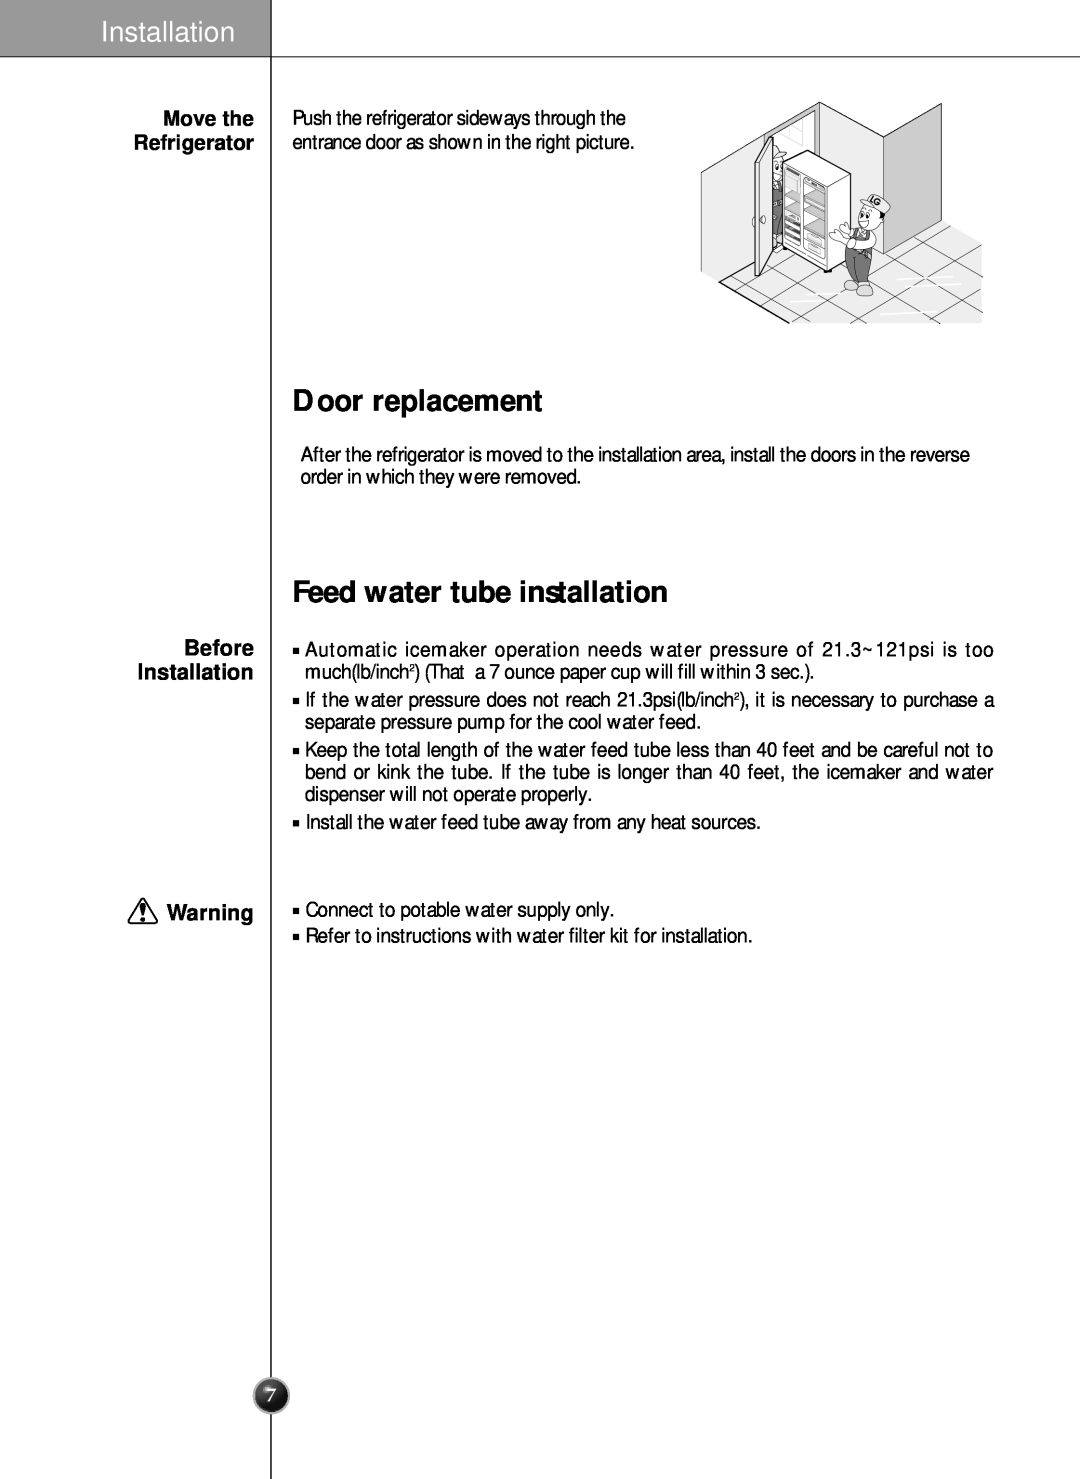 LG Electronics LRSC 26980TT manual Door replacement, Feed water tube installation, Before Installation 